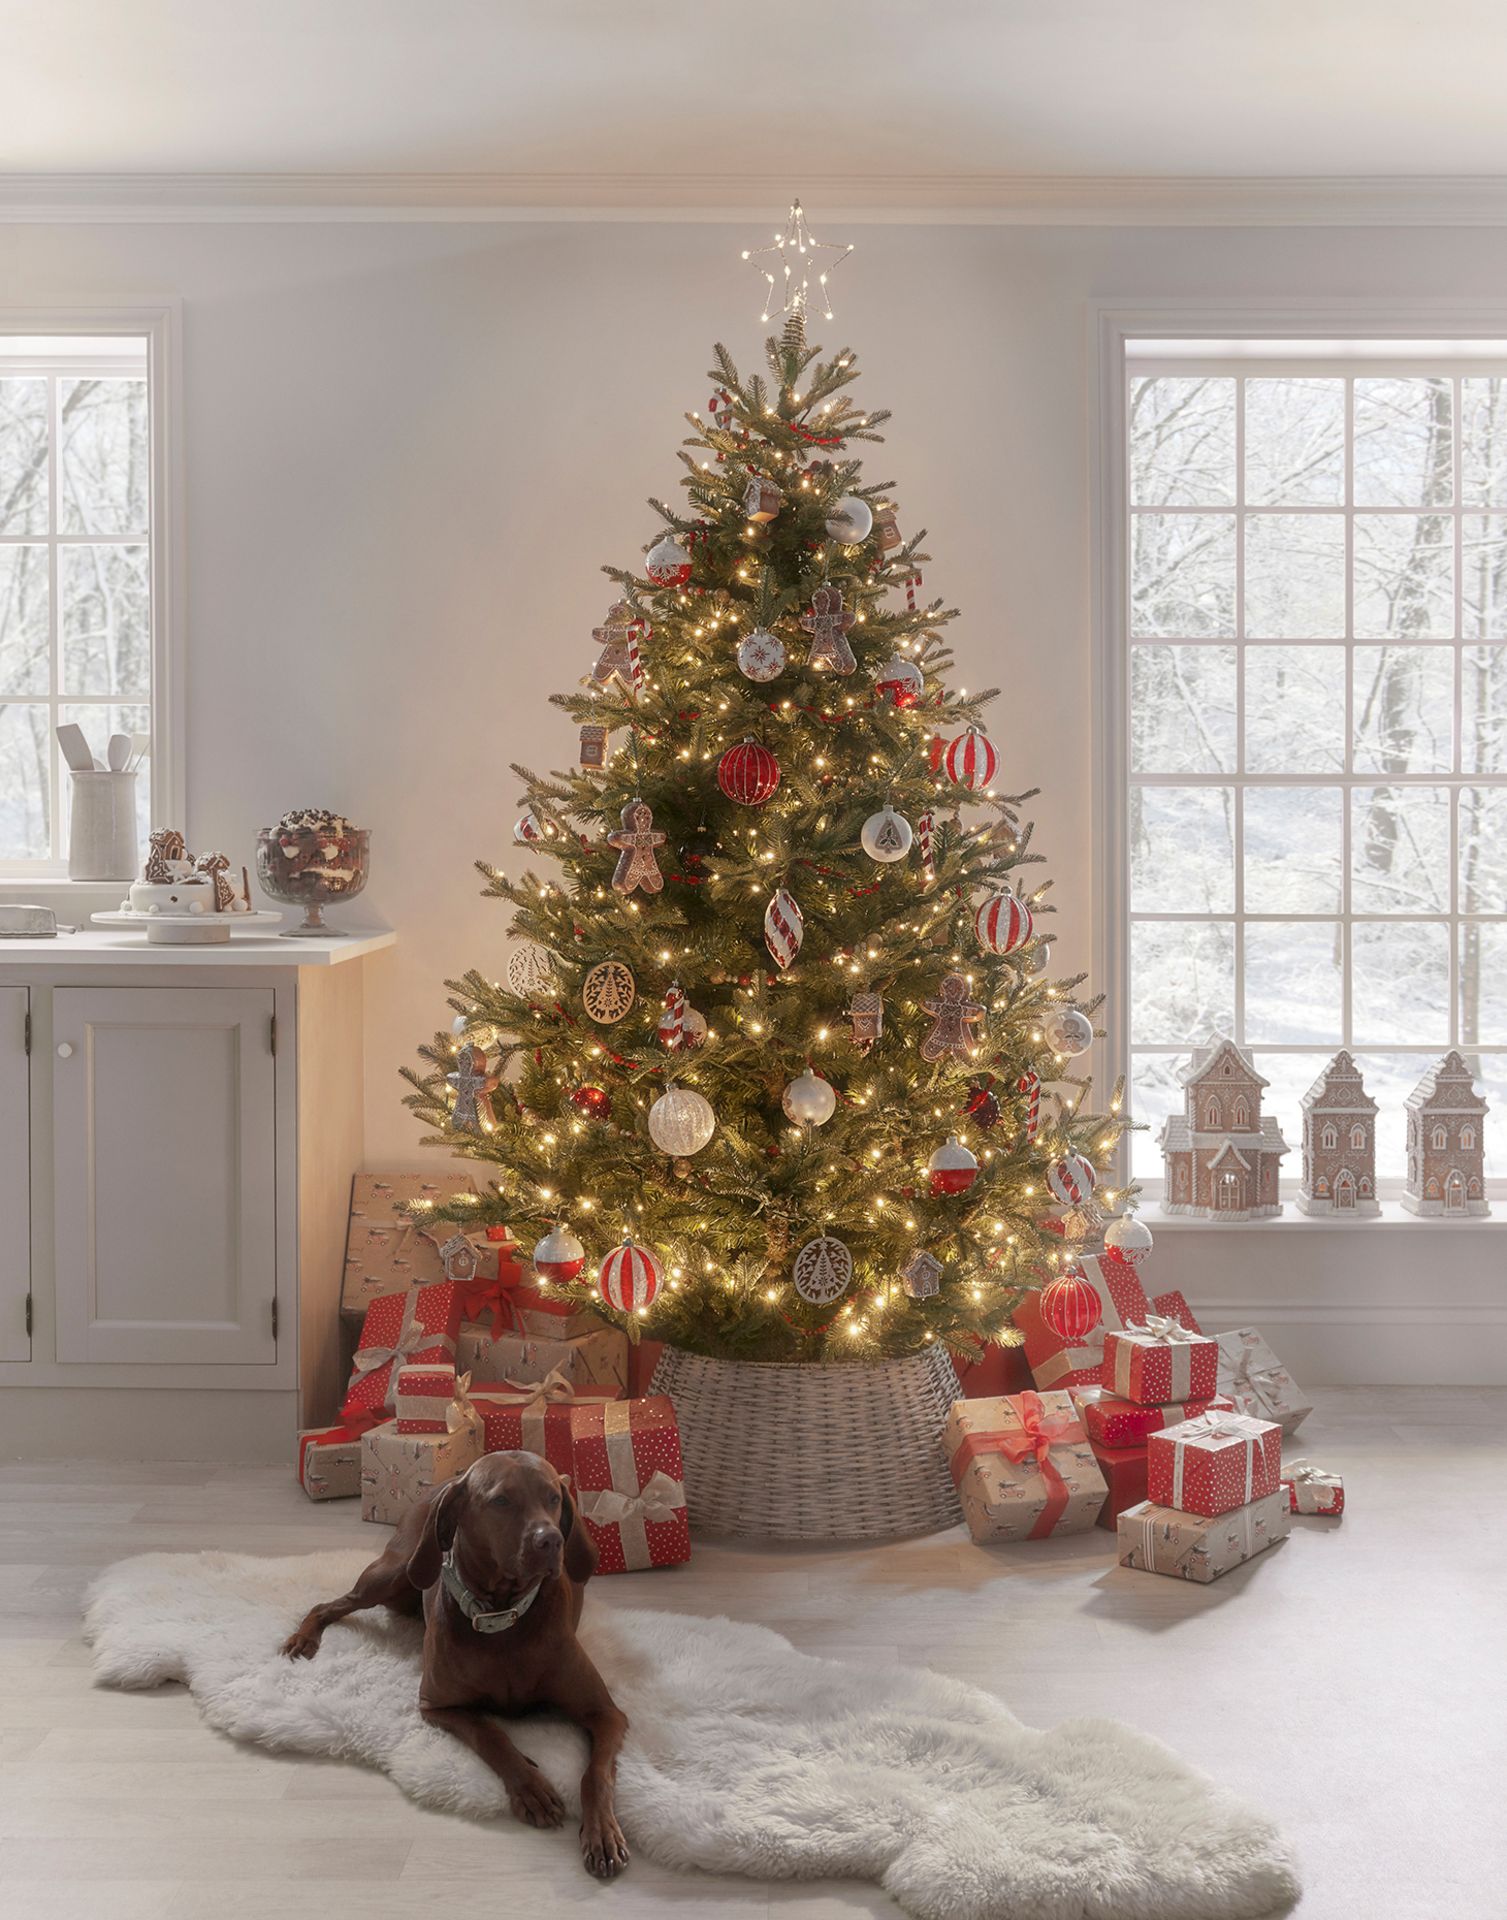 Cox & Cox 7ft Pre-Lit Aspen Mountain Spruce Christmas Tree. RRP £675.00. The perfect centrepiece for